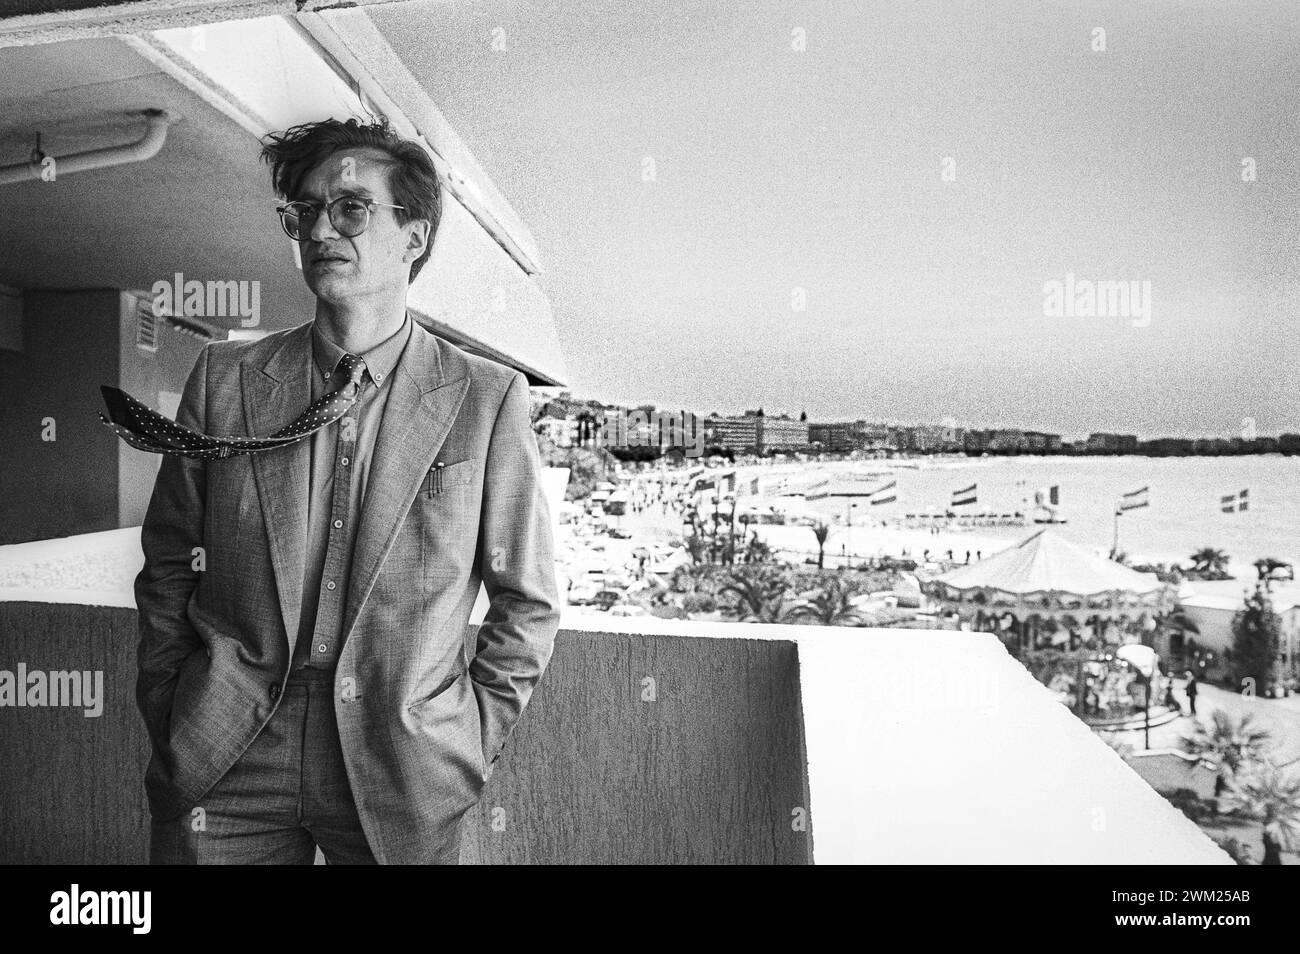 MME4779990 Cannes Film festival 1982. German director Wim Wenders, in competition with the movie “” Hammett””/Festival del Cinema di Cannes 1982. He registered Wim Wenders, in concorso con il film “” Hammett””” -; (add.info.: Cannes Film festival 1982. German director Wim Wenders, in competition with the movie “” Hammett””/Festival del Cinema di Cannes 1982. He registered Wim Wenders, in concorso con il film “” Hammett””” -); © Marcello Mencarini. All rights reserved 2024. Stock Photo